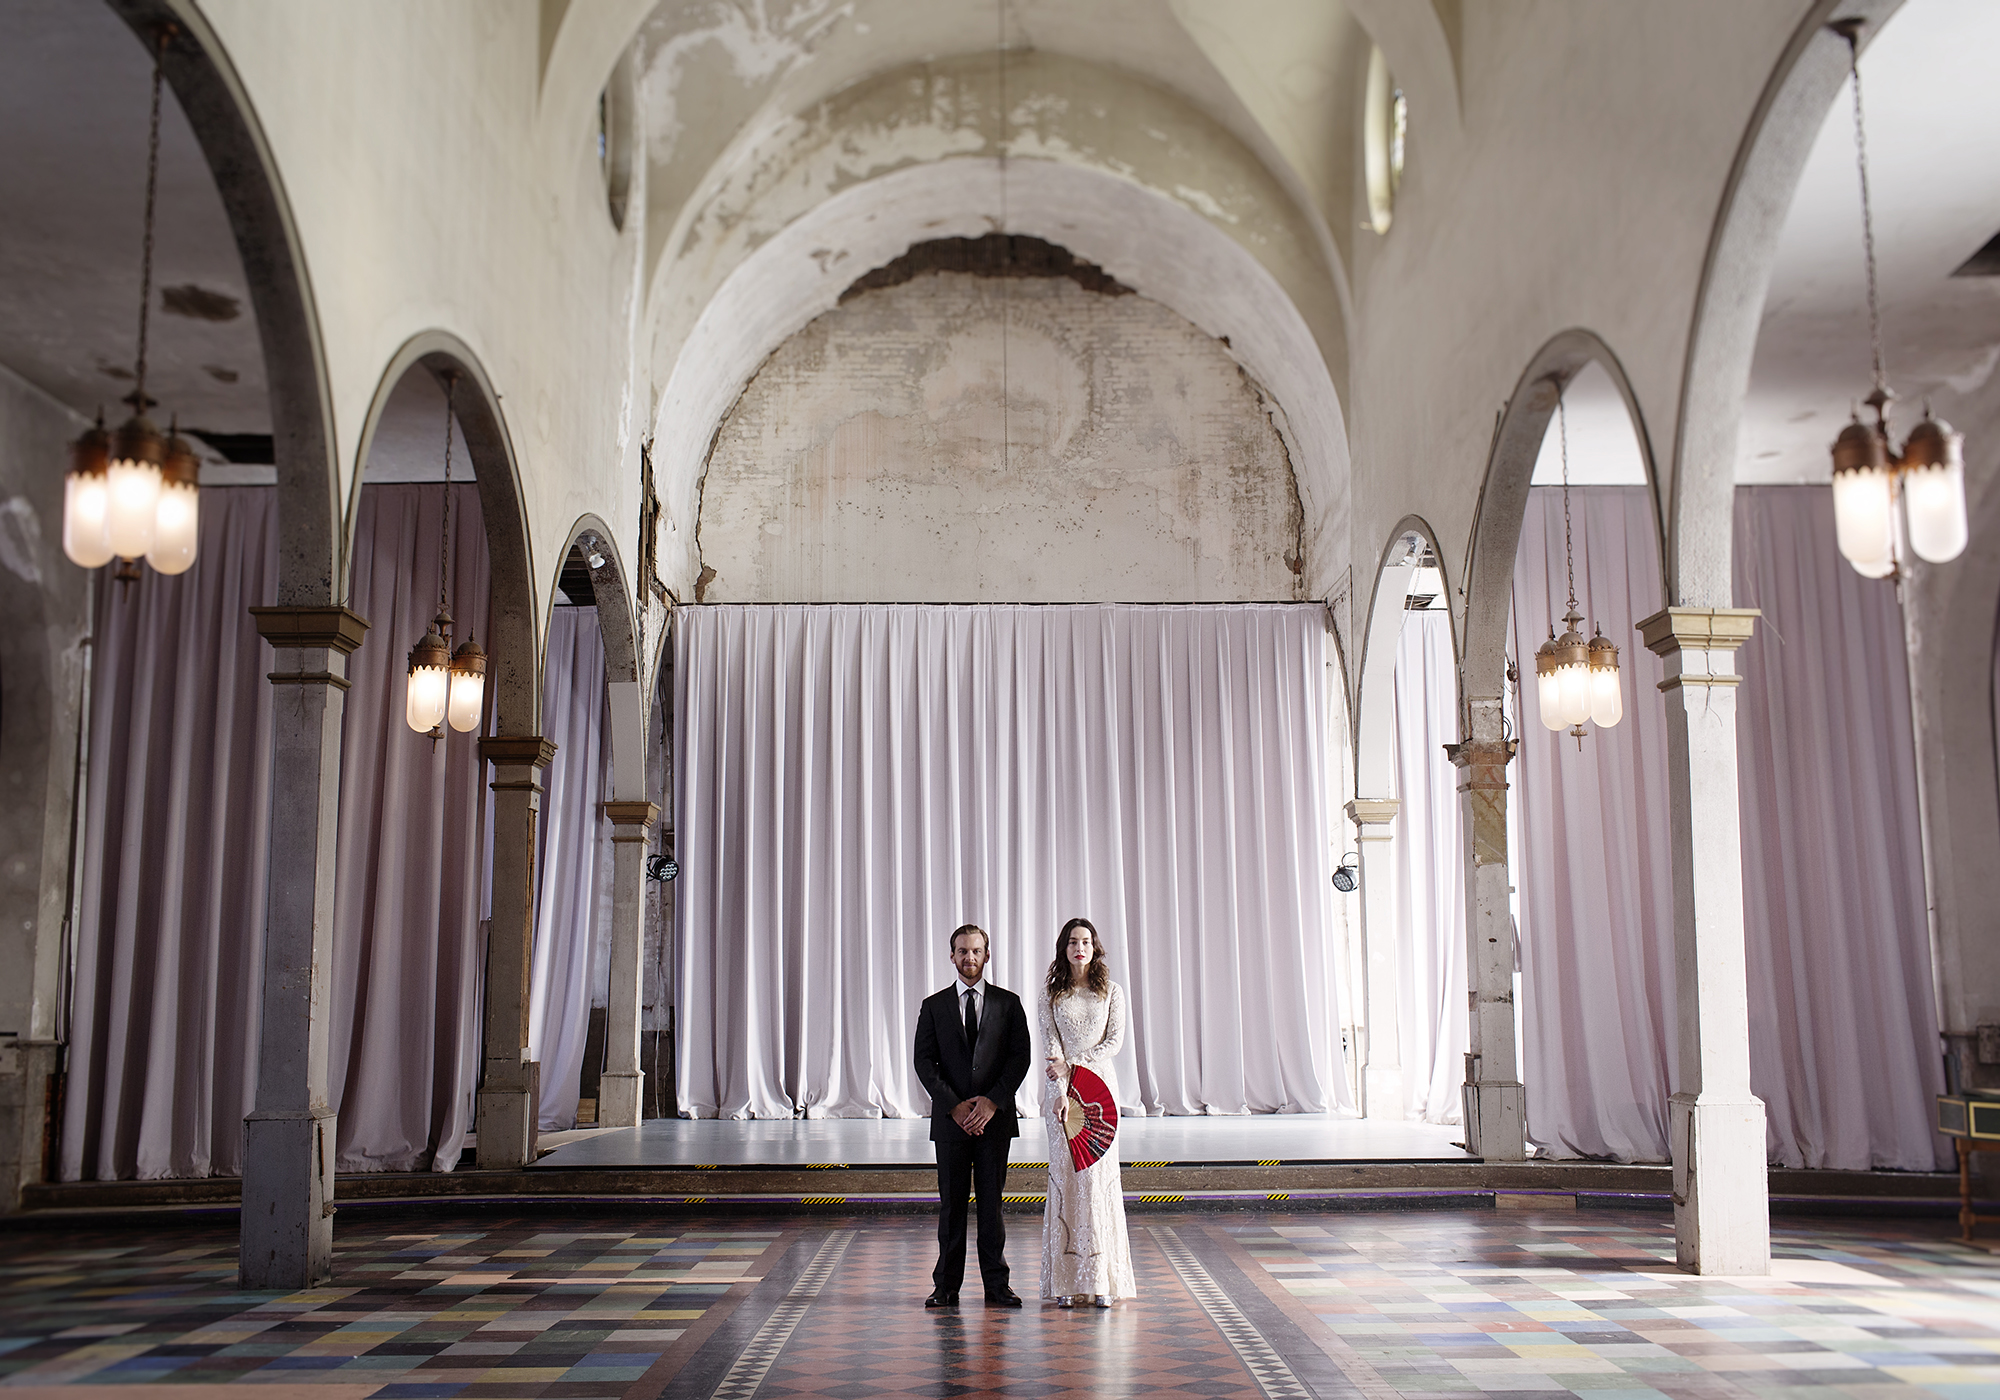 Newlywed couple's portrait in The Marigny Opera House, an eclectic New Orleans wedding venue